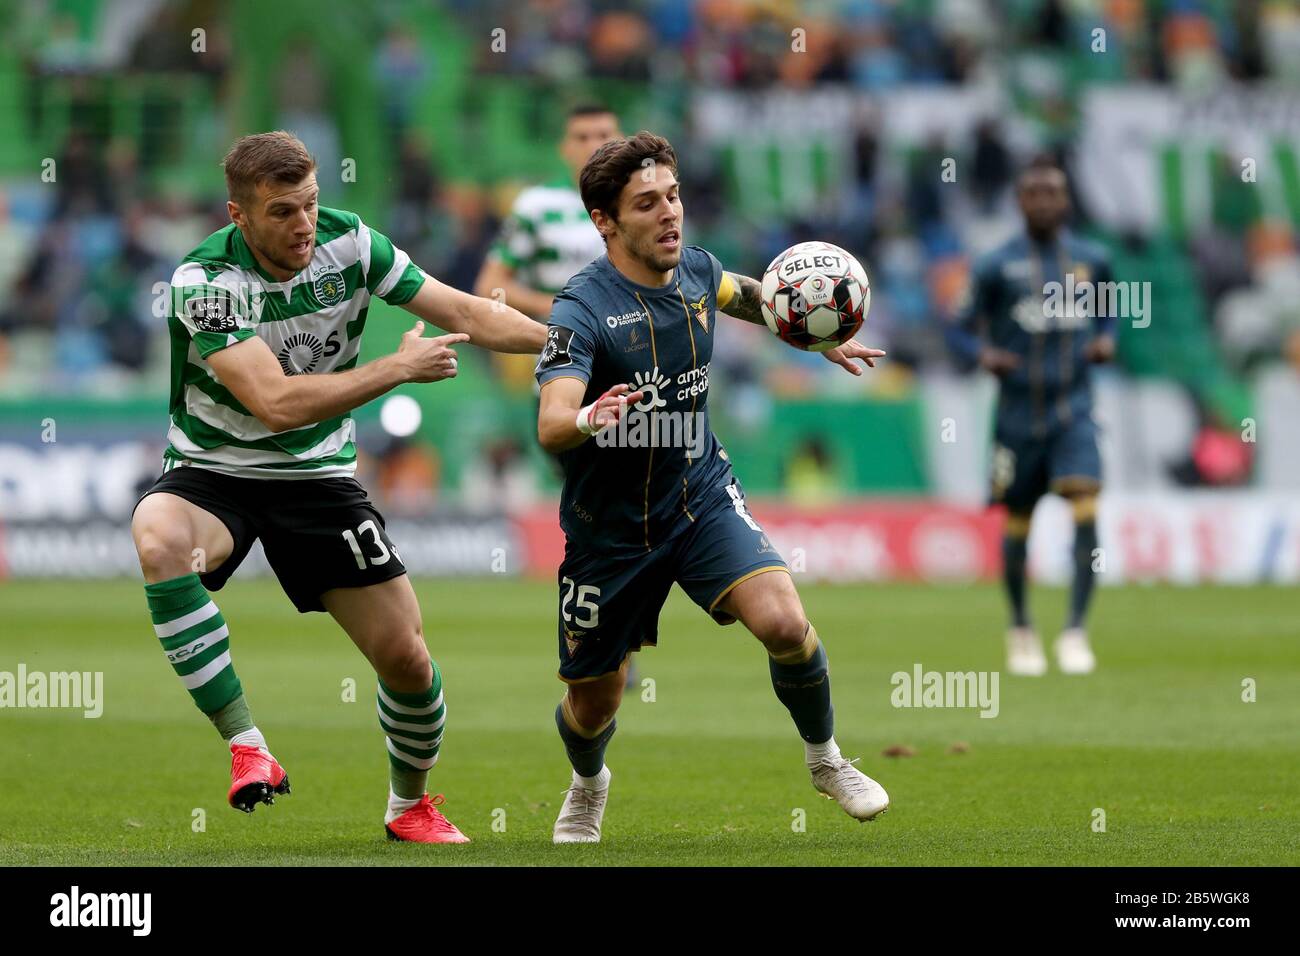 Lisbon. 8th Mar, 2020. Stefan Ristovski (L) of Sporting CP vies with Afonso Figueiredo of Desportivo das Aves during the Portuguese First League soccer match between Sporting CP and Desportivo das Aves in Lisbon, Portugal on March 8, 2020. Credit: Pedro Fiuza/Xinhua/Alamy Live News Stock Photo